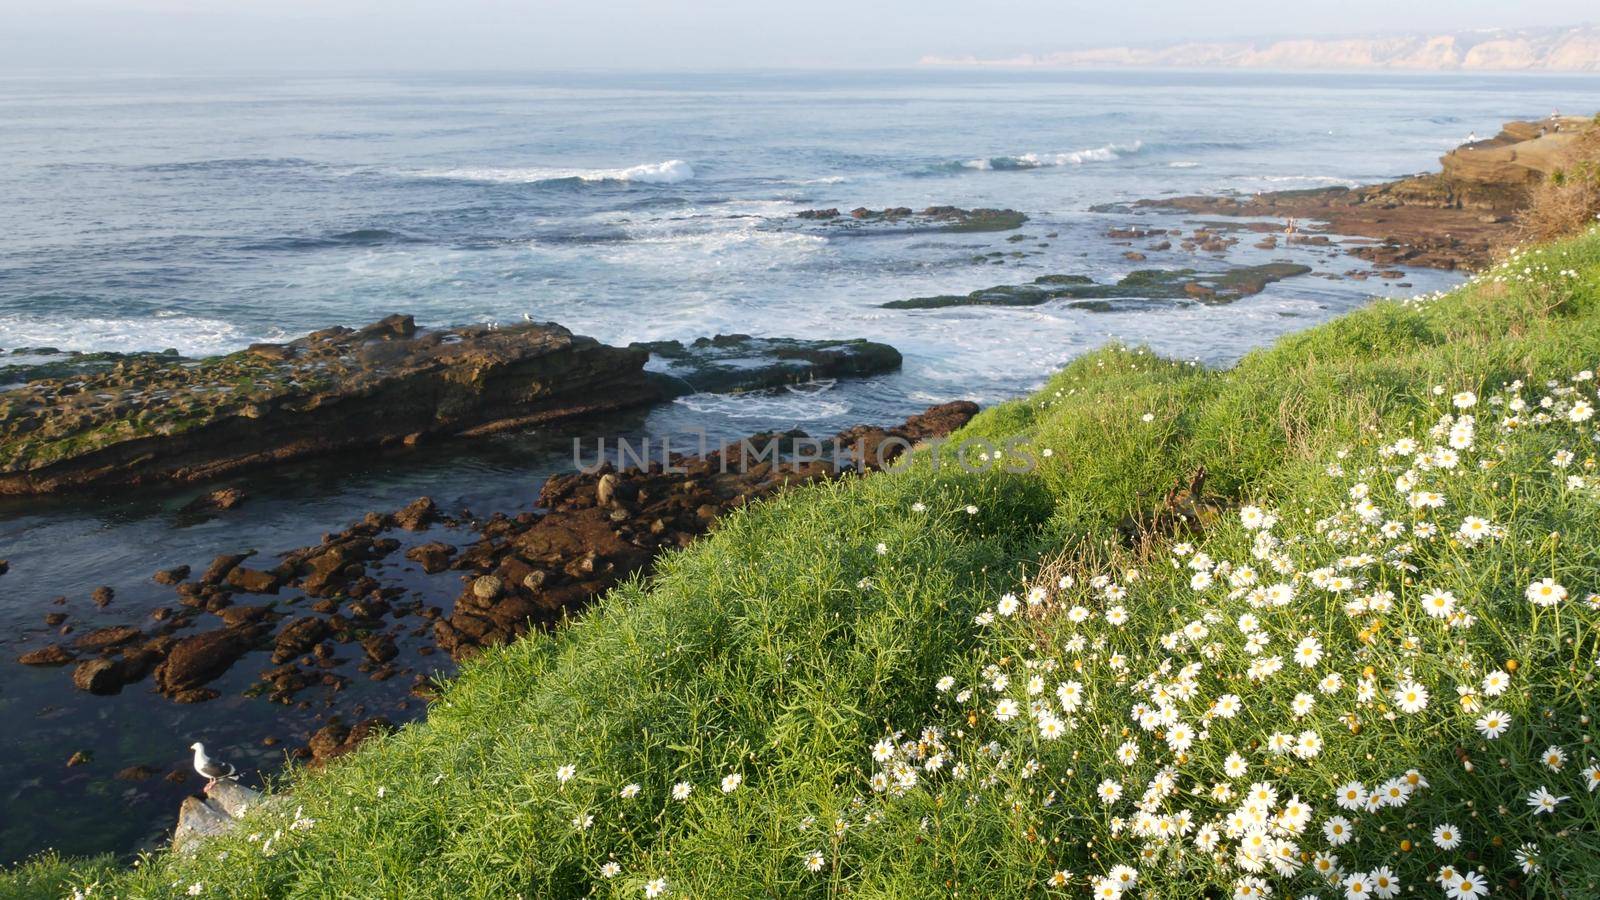 Simple white oxeye daisies in green grass over pacific ocean splashing waves. Wildflowers on the steep cliff. Tender marguerites in bloom near waters edge in La Jolla Cove San Diego, California USA by DogoraSun